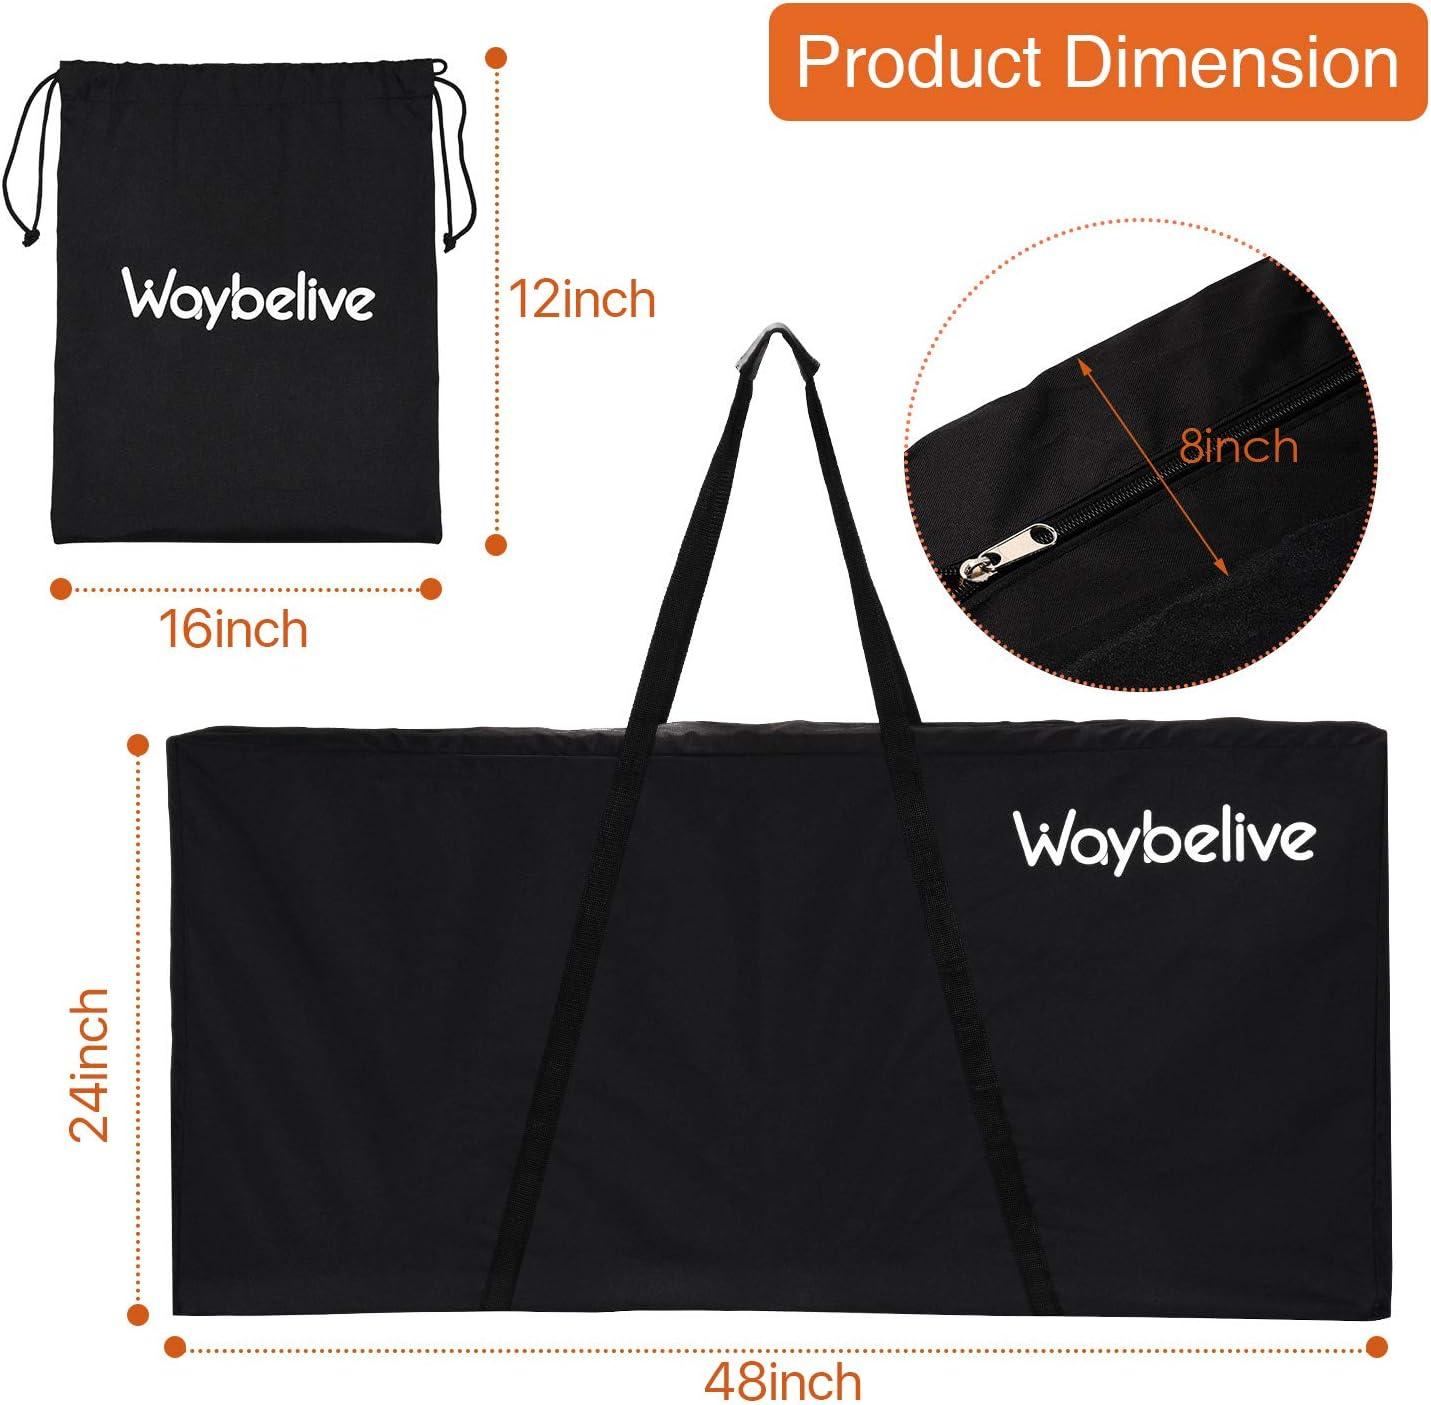 Waybelive 2 Pieces Bean Bag Game Carrying Bag Canvas Cornhole